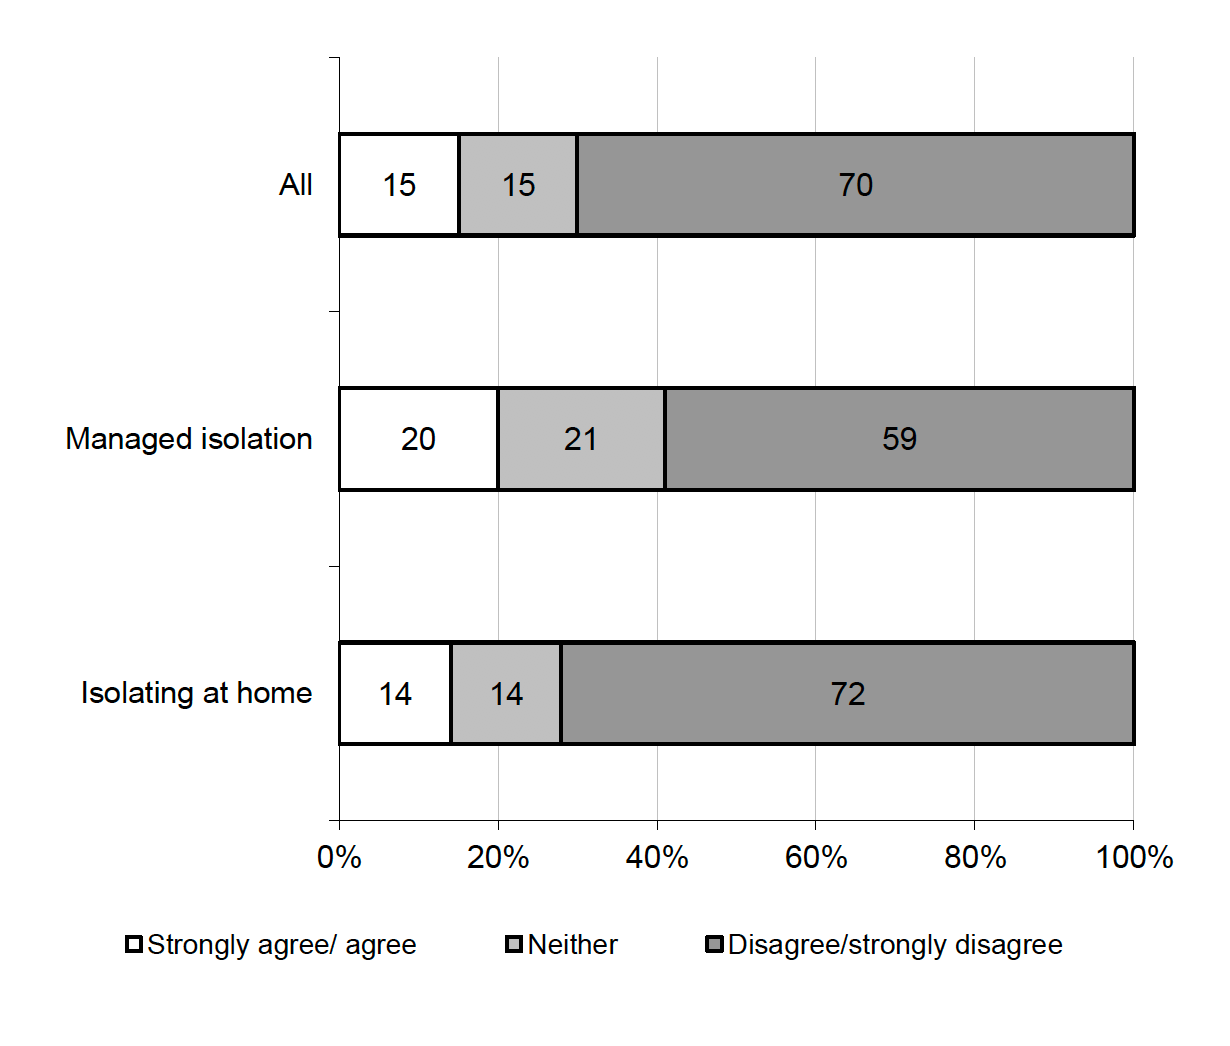 Figure 5.6 Levels of agreement with statement ‘it should be up to the individual, not the government, to decide whether they need to self-isolate or not’ by arrangement type (%, All International Traveller participants)
15% of International Travellers – 15% agreed, lower among those isolating at home (14%) than those in managed isolation (20%)
